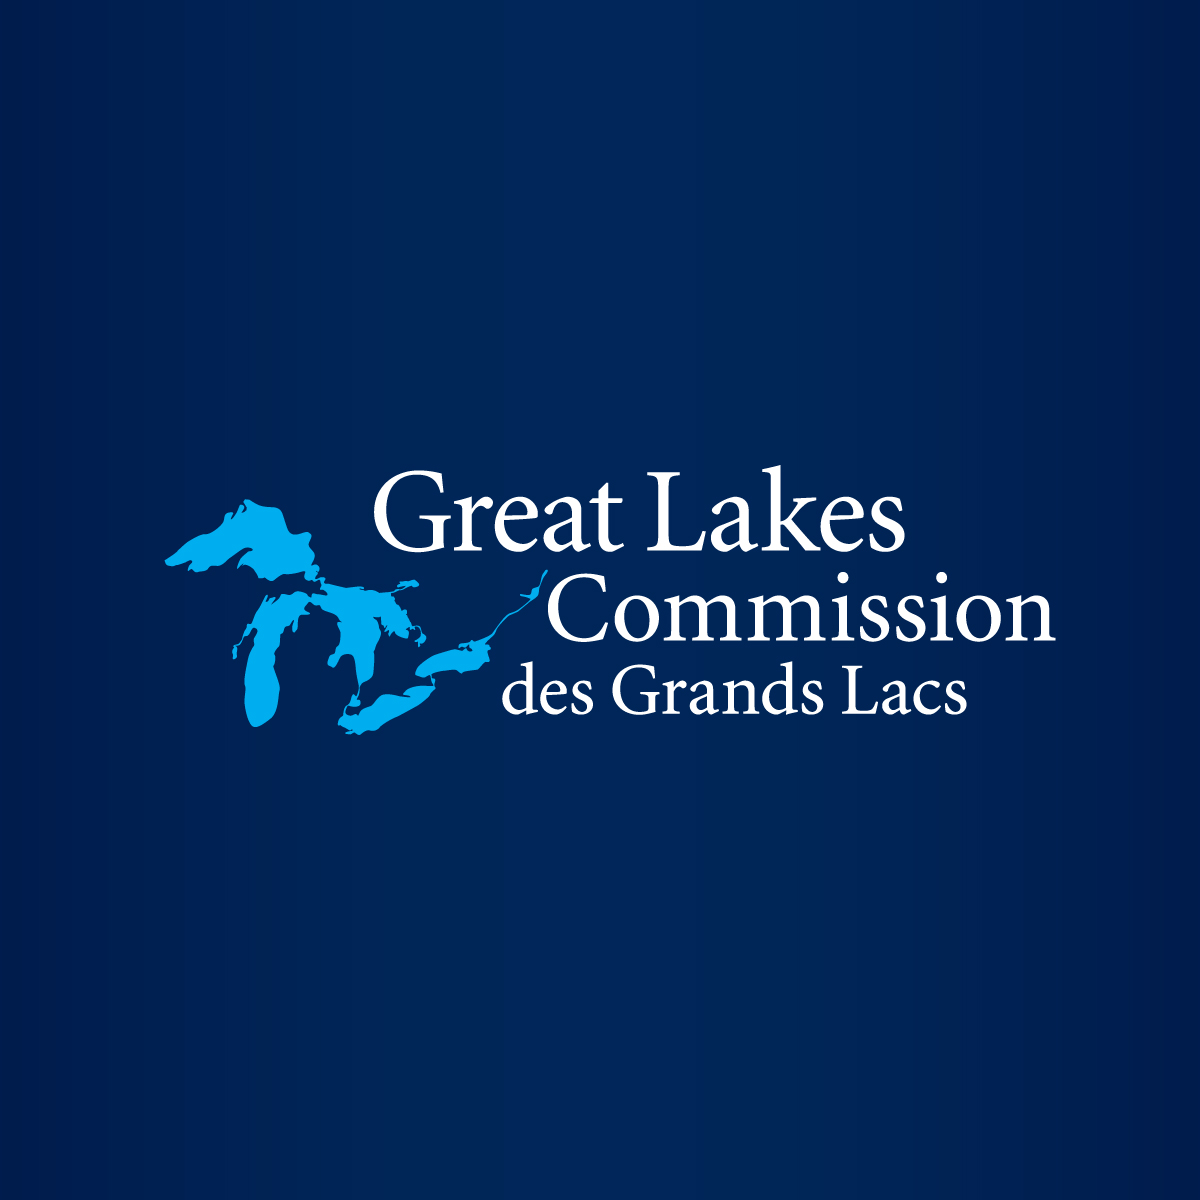 Kaptur, Latta lead colleagues in support of hydrogen hub for Great Lakes region